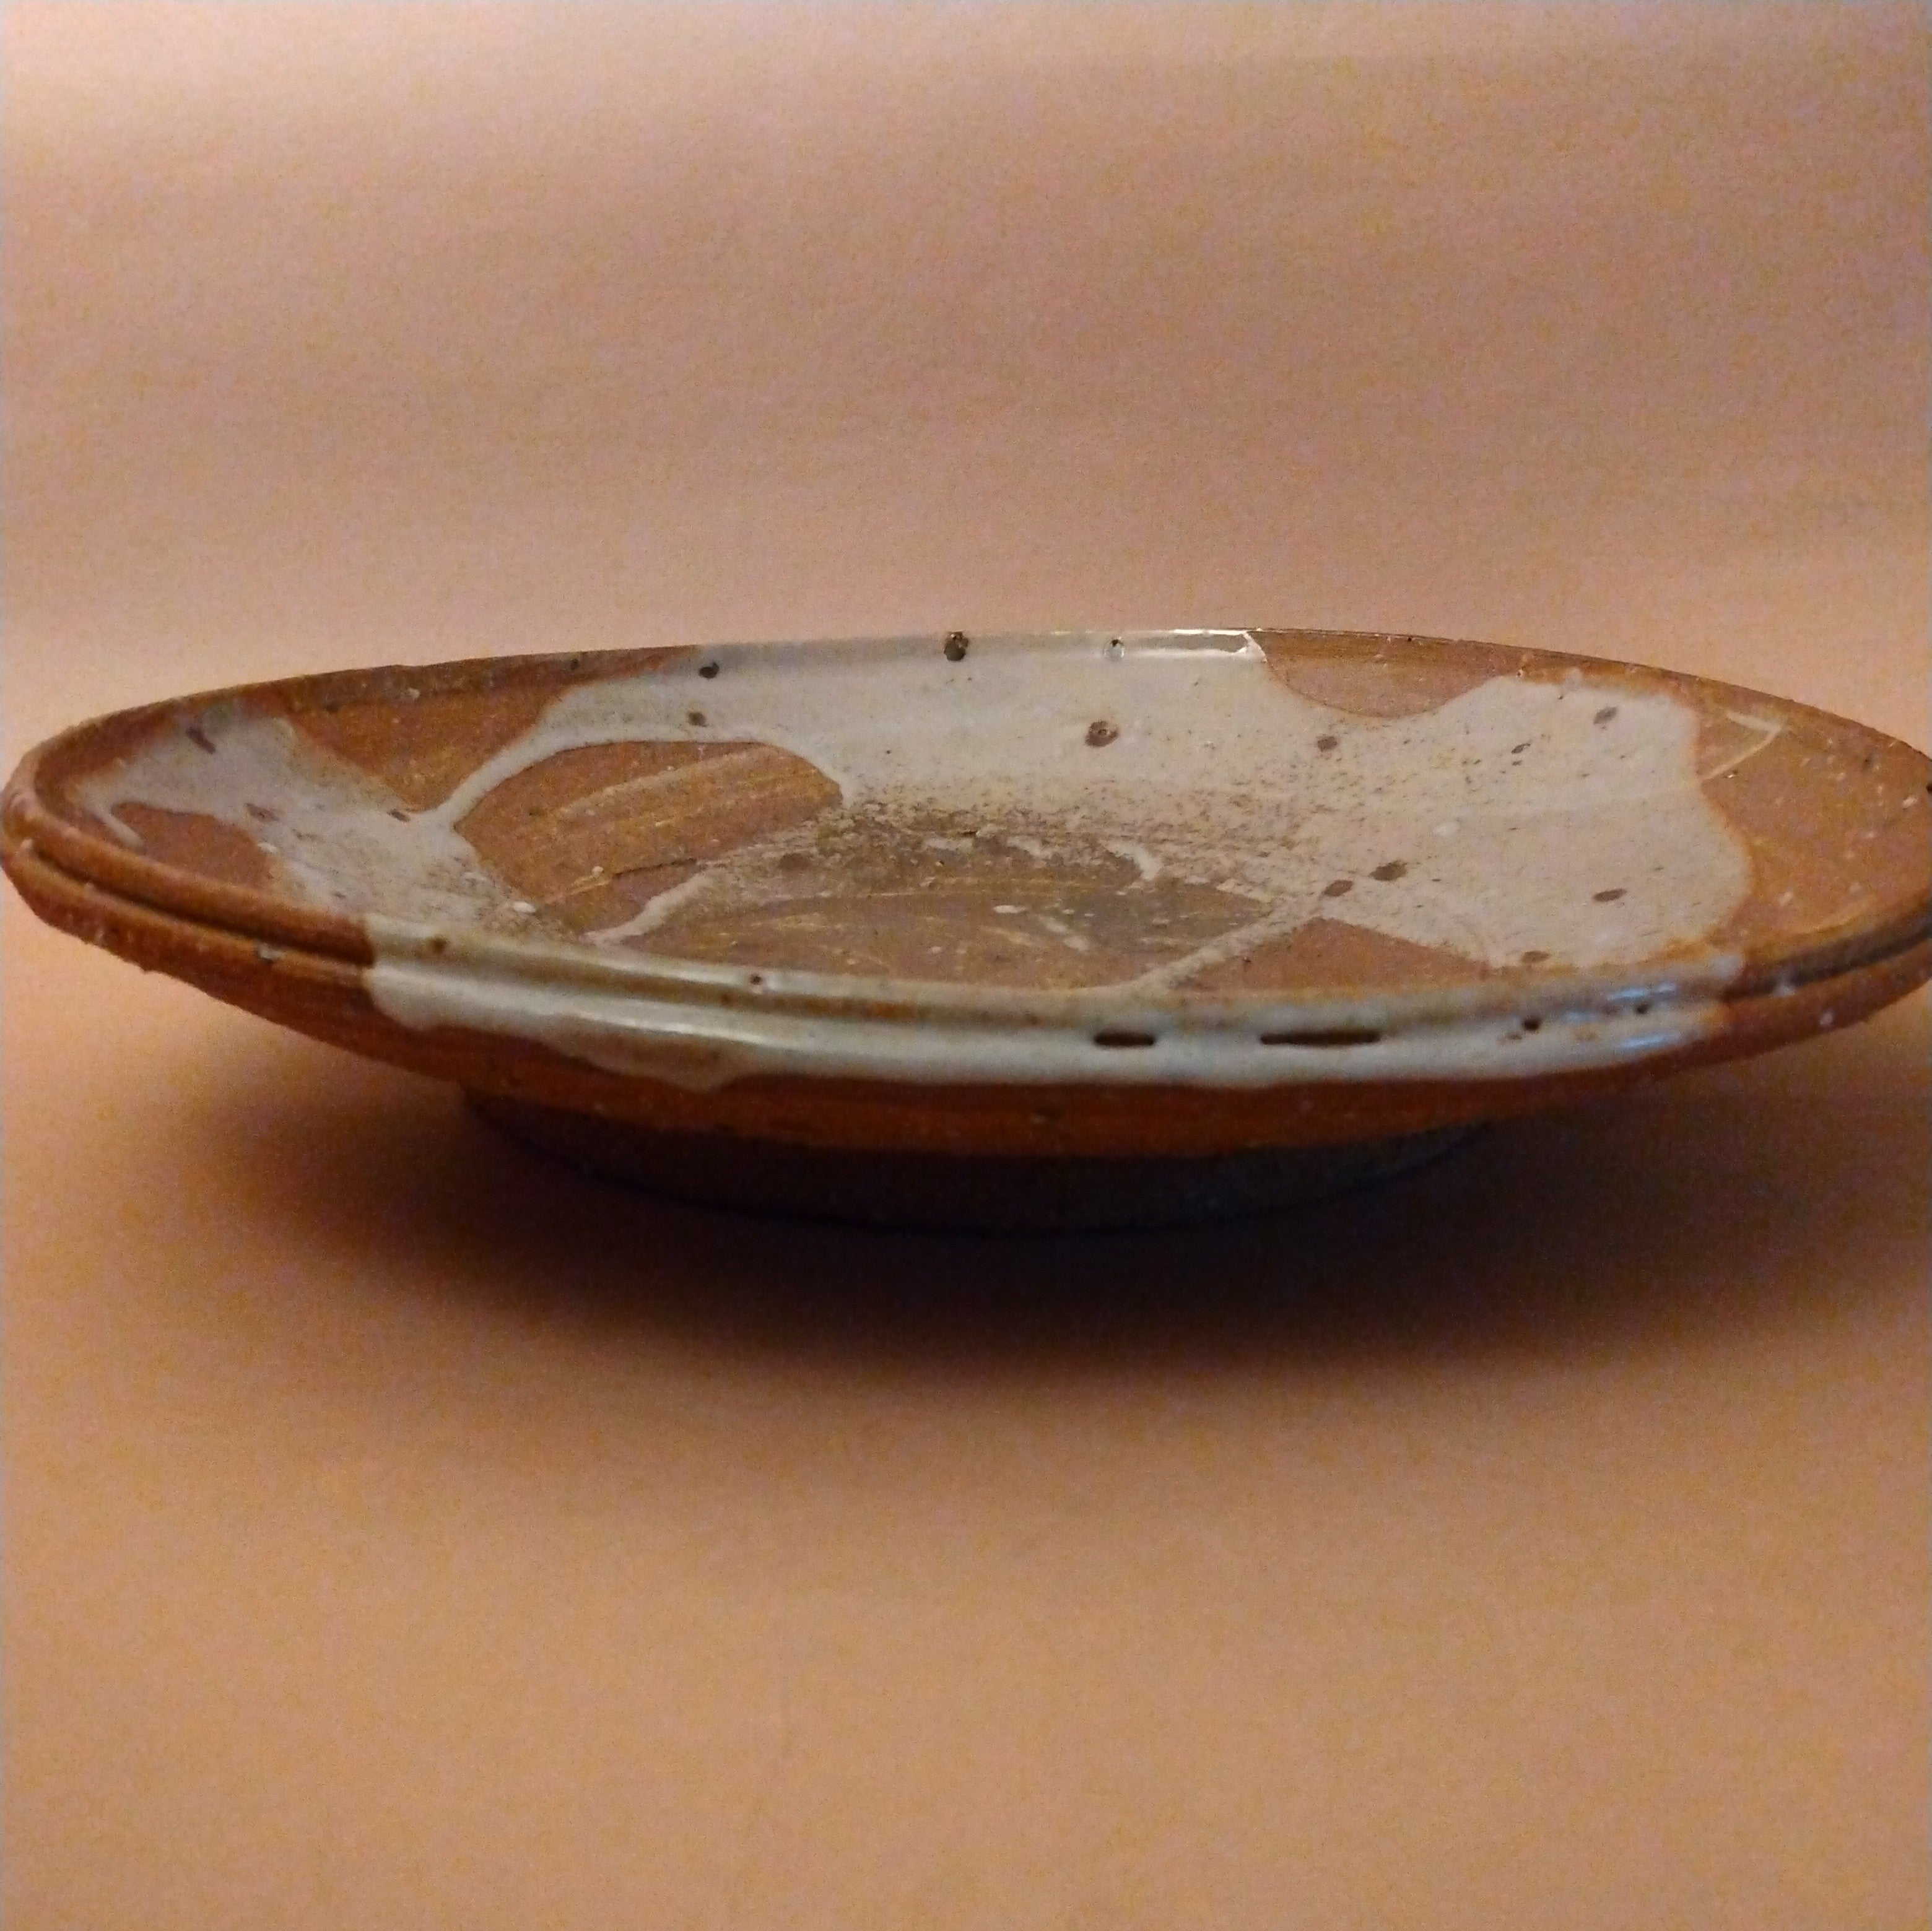 Wood-fired Plate with Shino Glaze Ladle Splashes, by George Gledhill